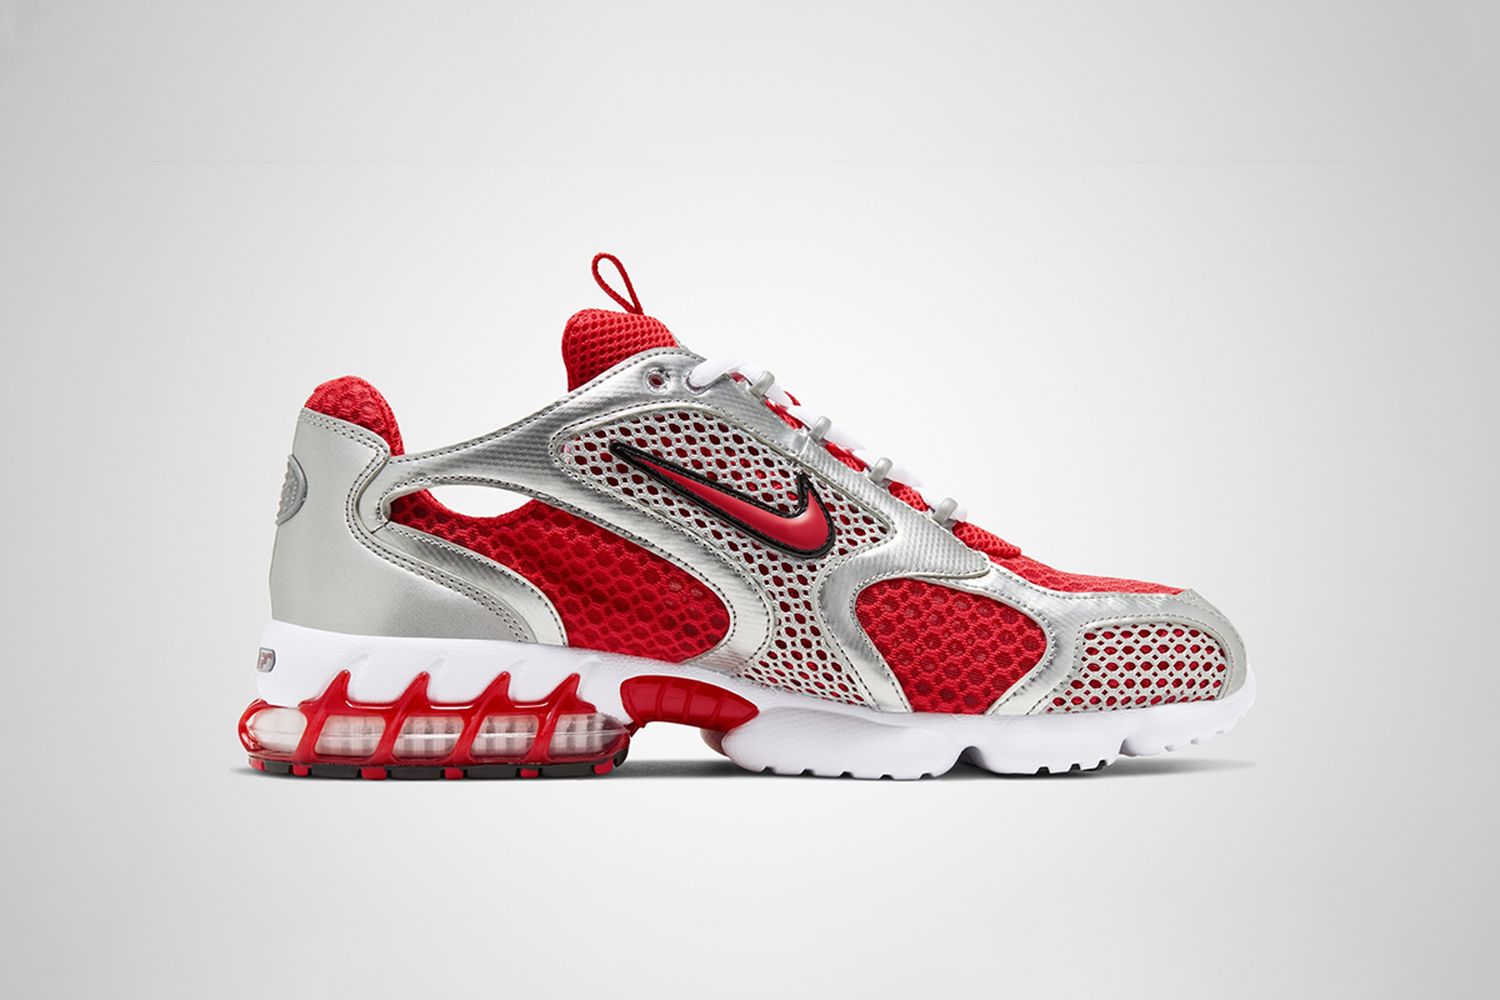 Air Zoom Spiridon Cage 2 "Track Red"